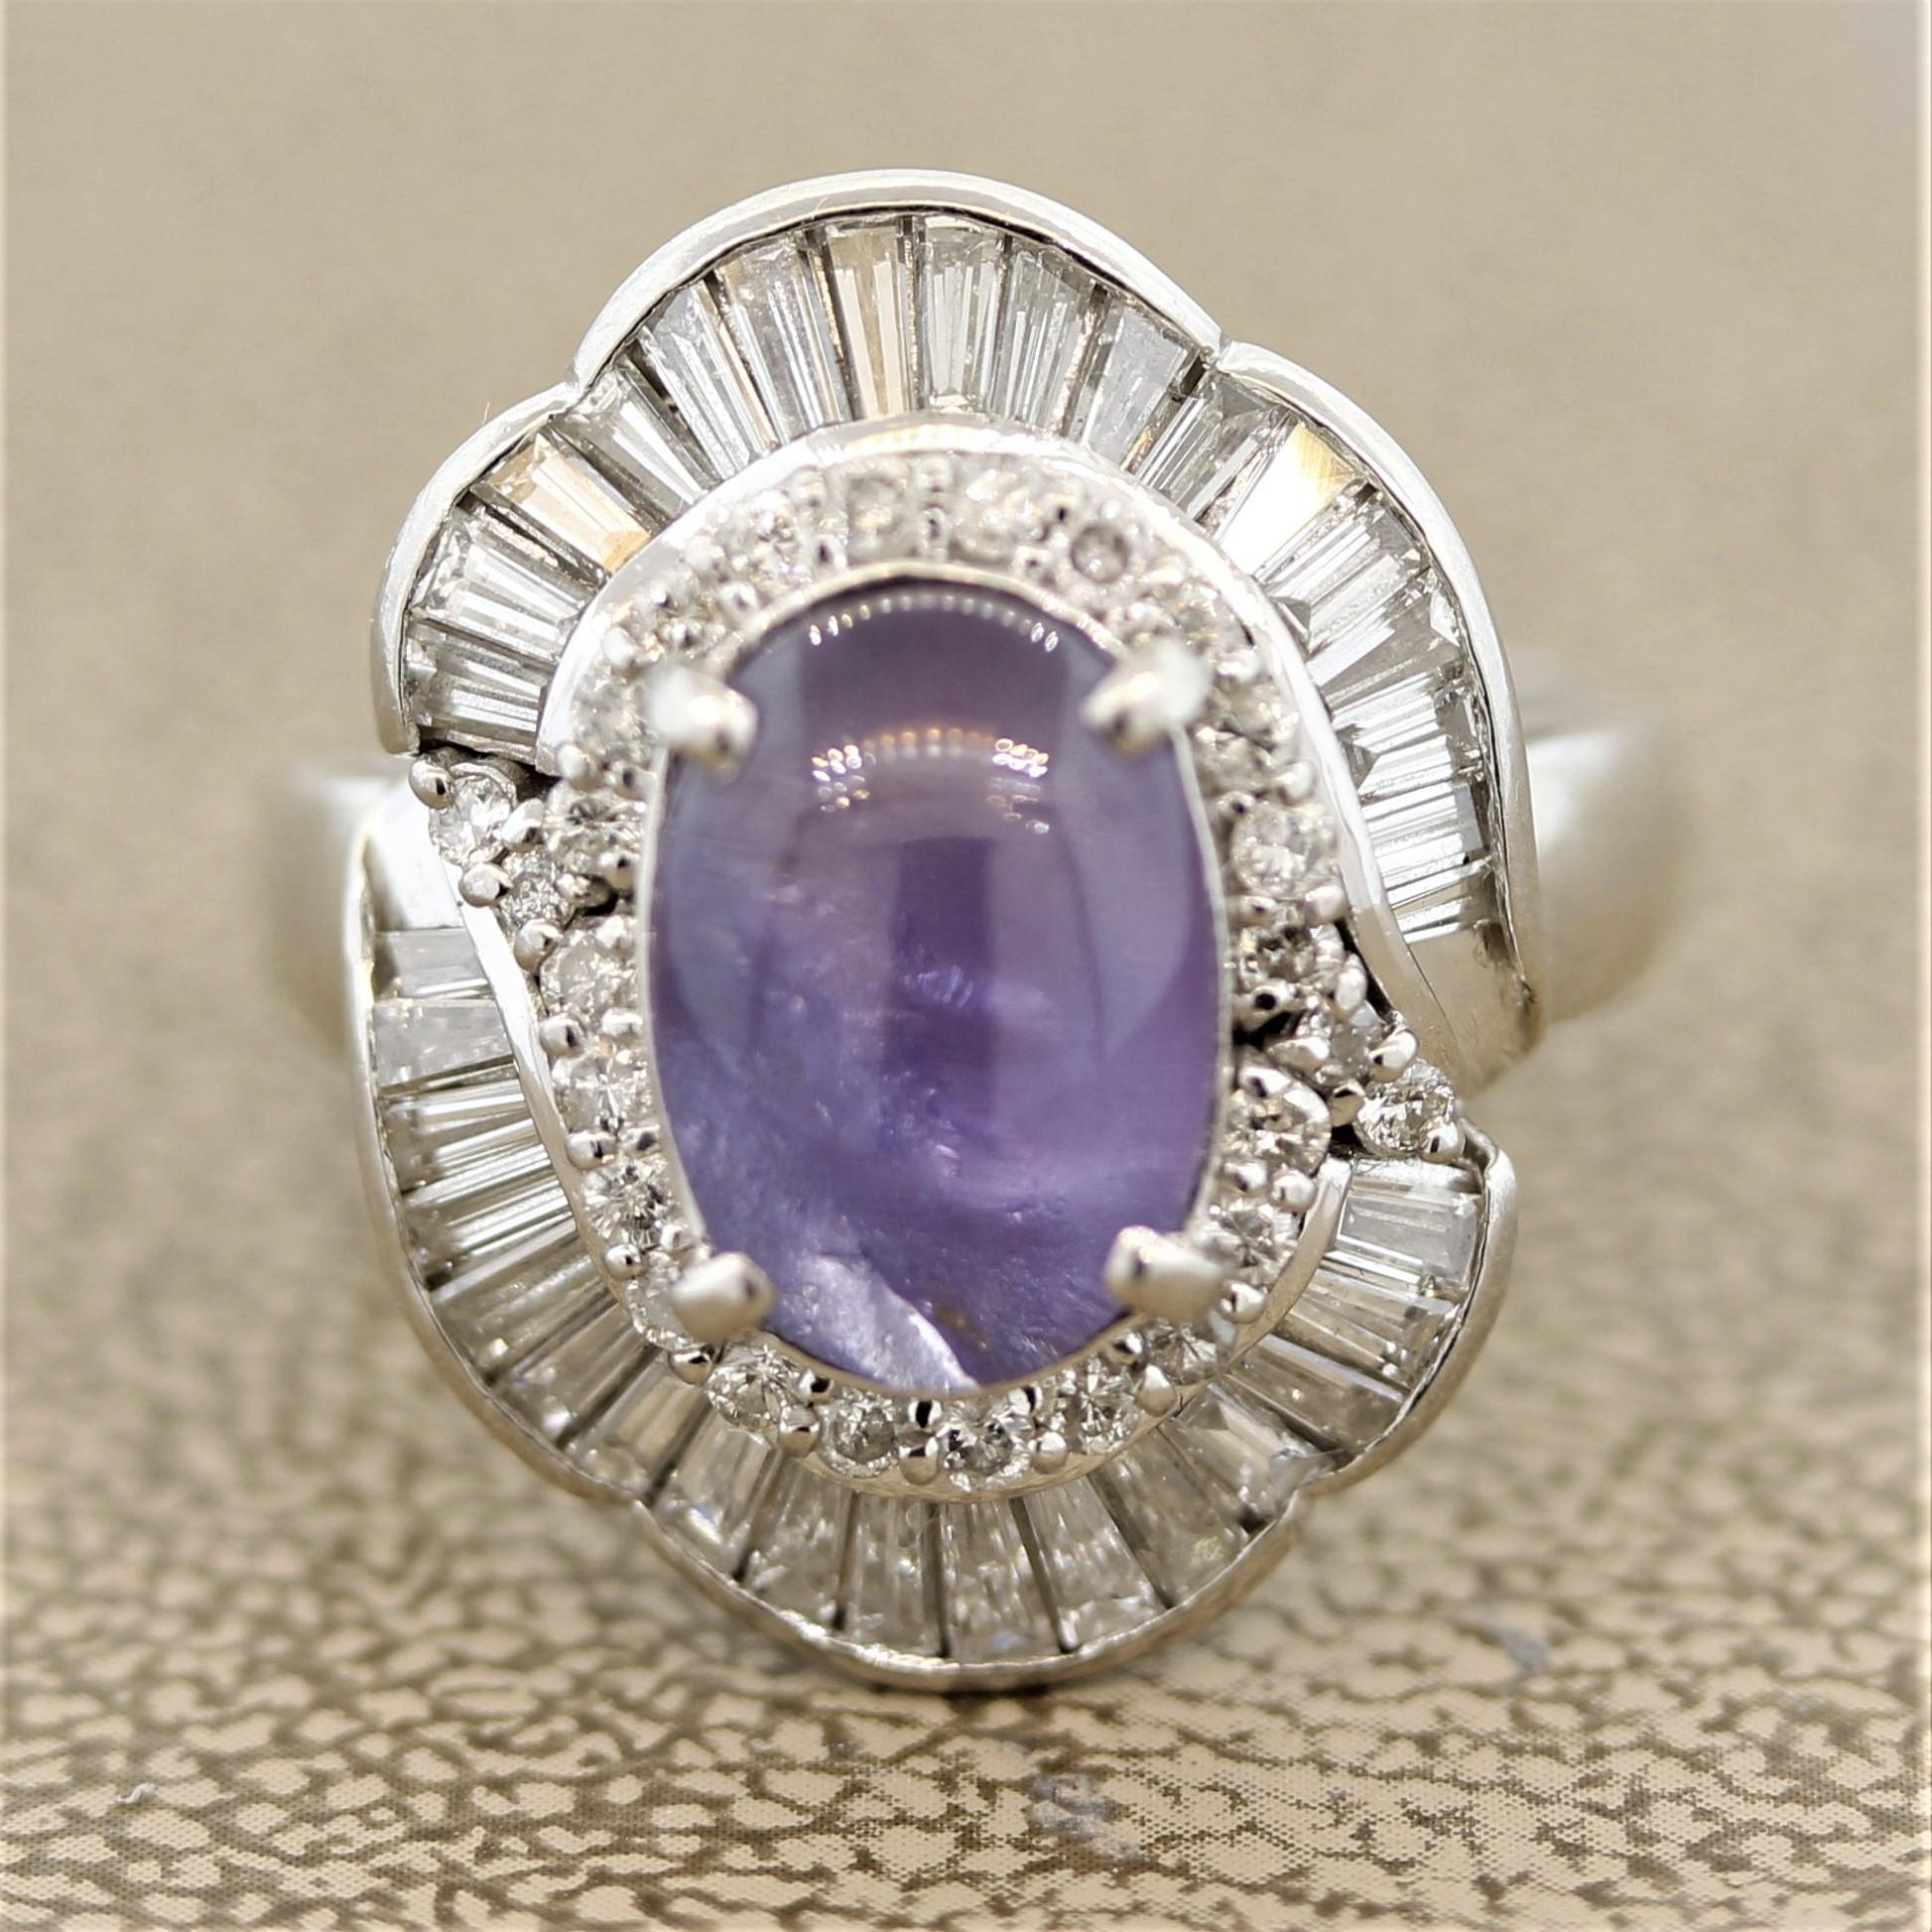 A special stone with a unique color! A purple star sapphire weighing 5.10 carats takes center stage of this hand-fabricated platinum ring. It has a sweet lilac purple color rarely seen in star sapphires. When a light hits the top of the stone a 6